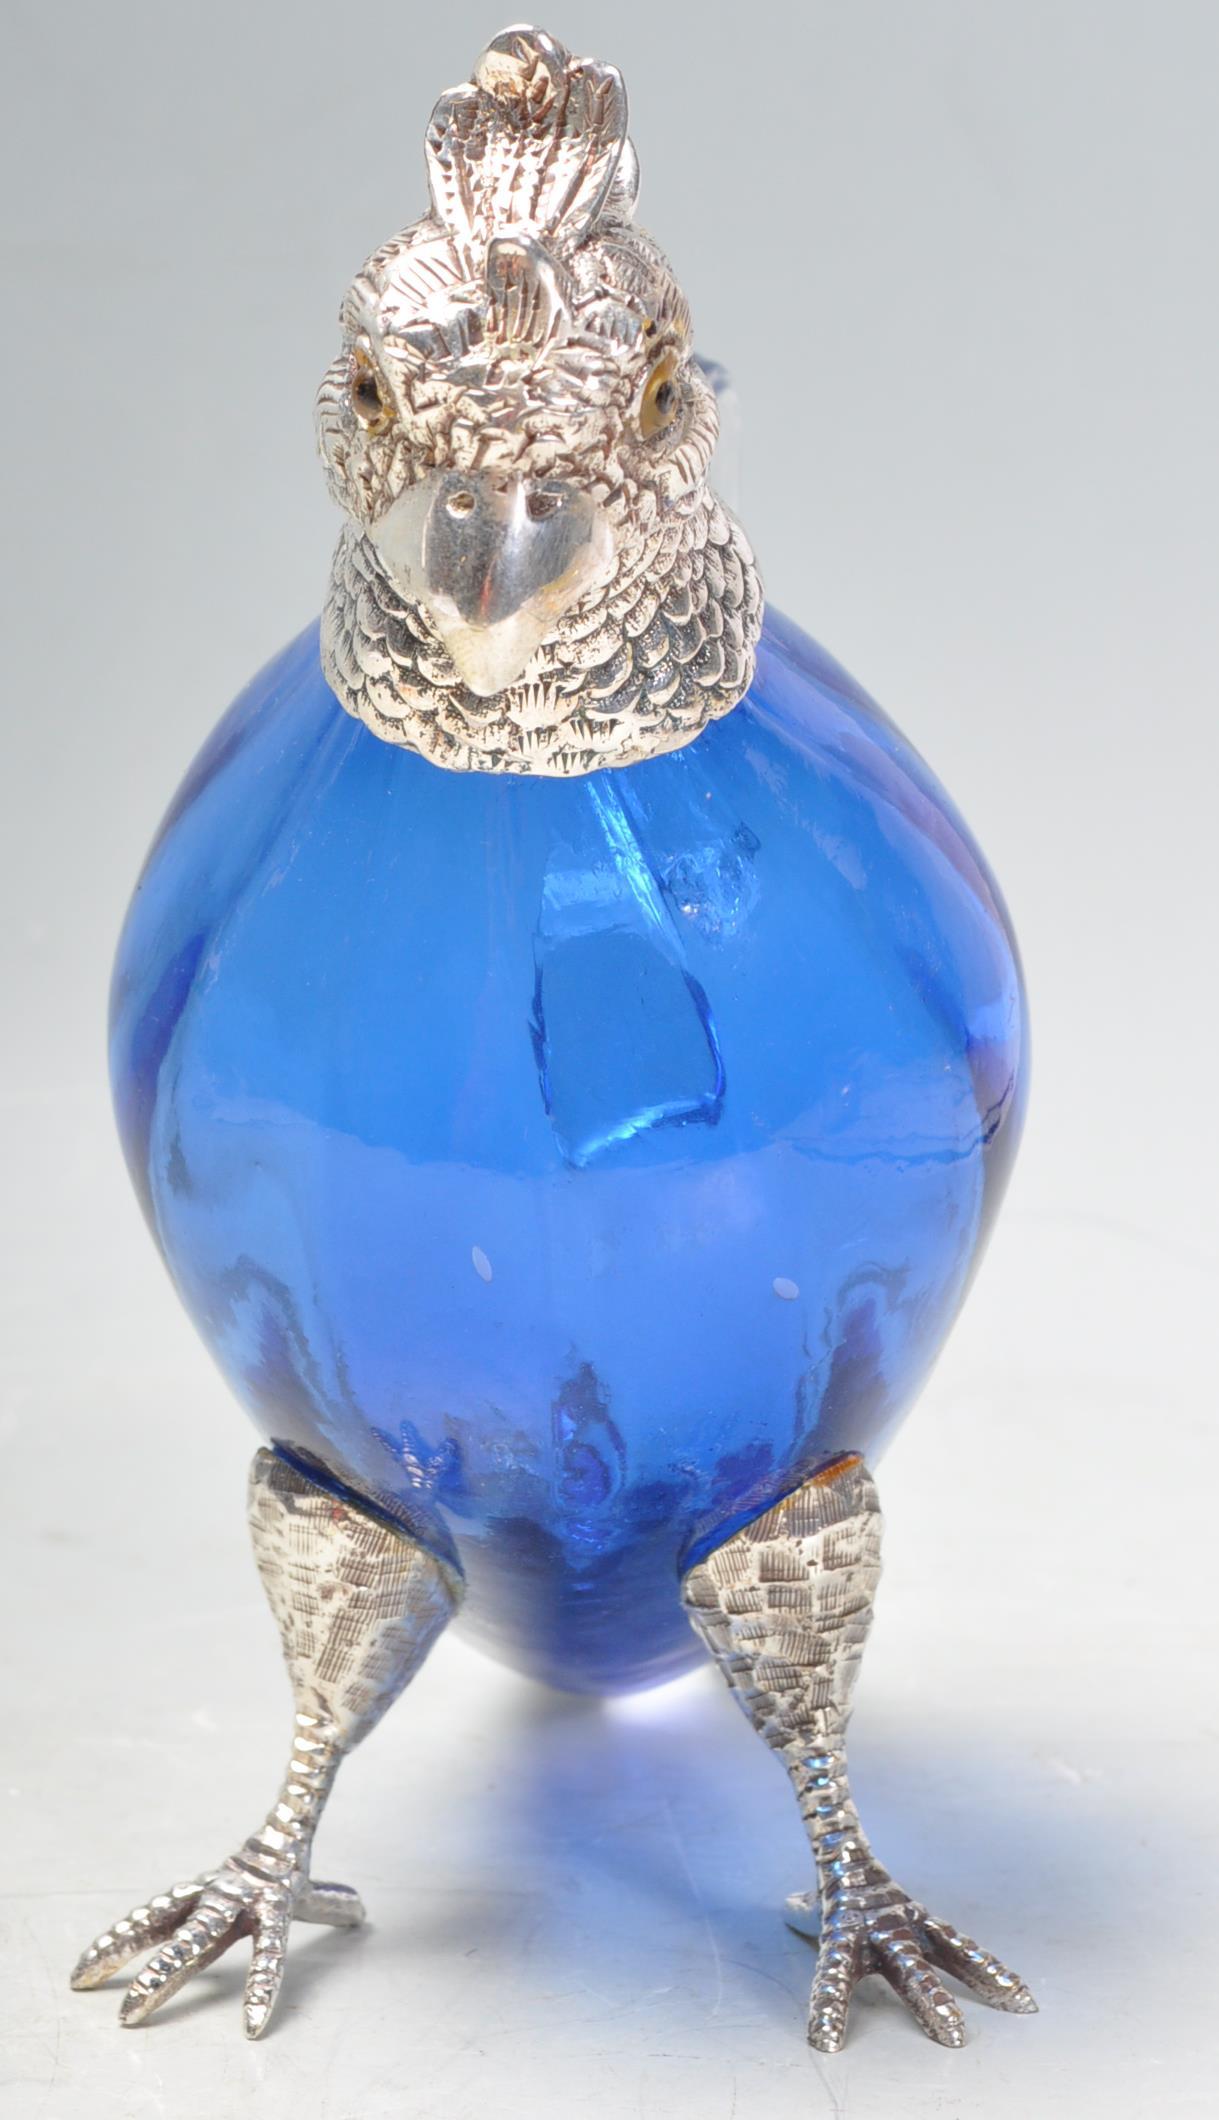 SILVER PLATE AND BLUE GLASS PARROT CLARET JUG. - Image 4 of 7